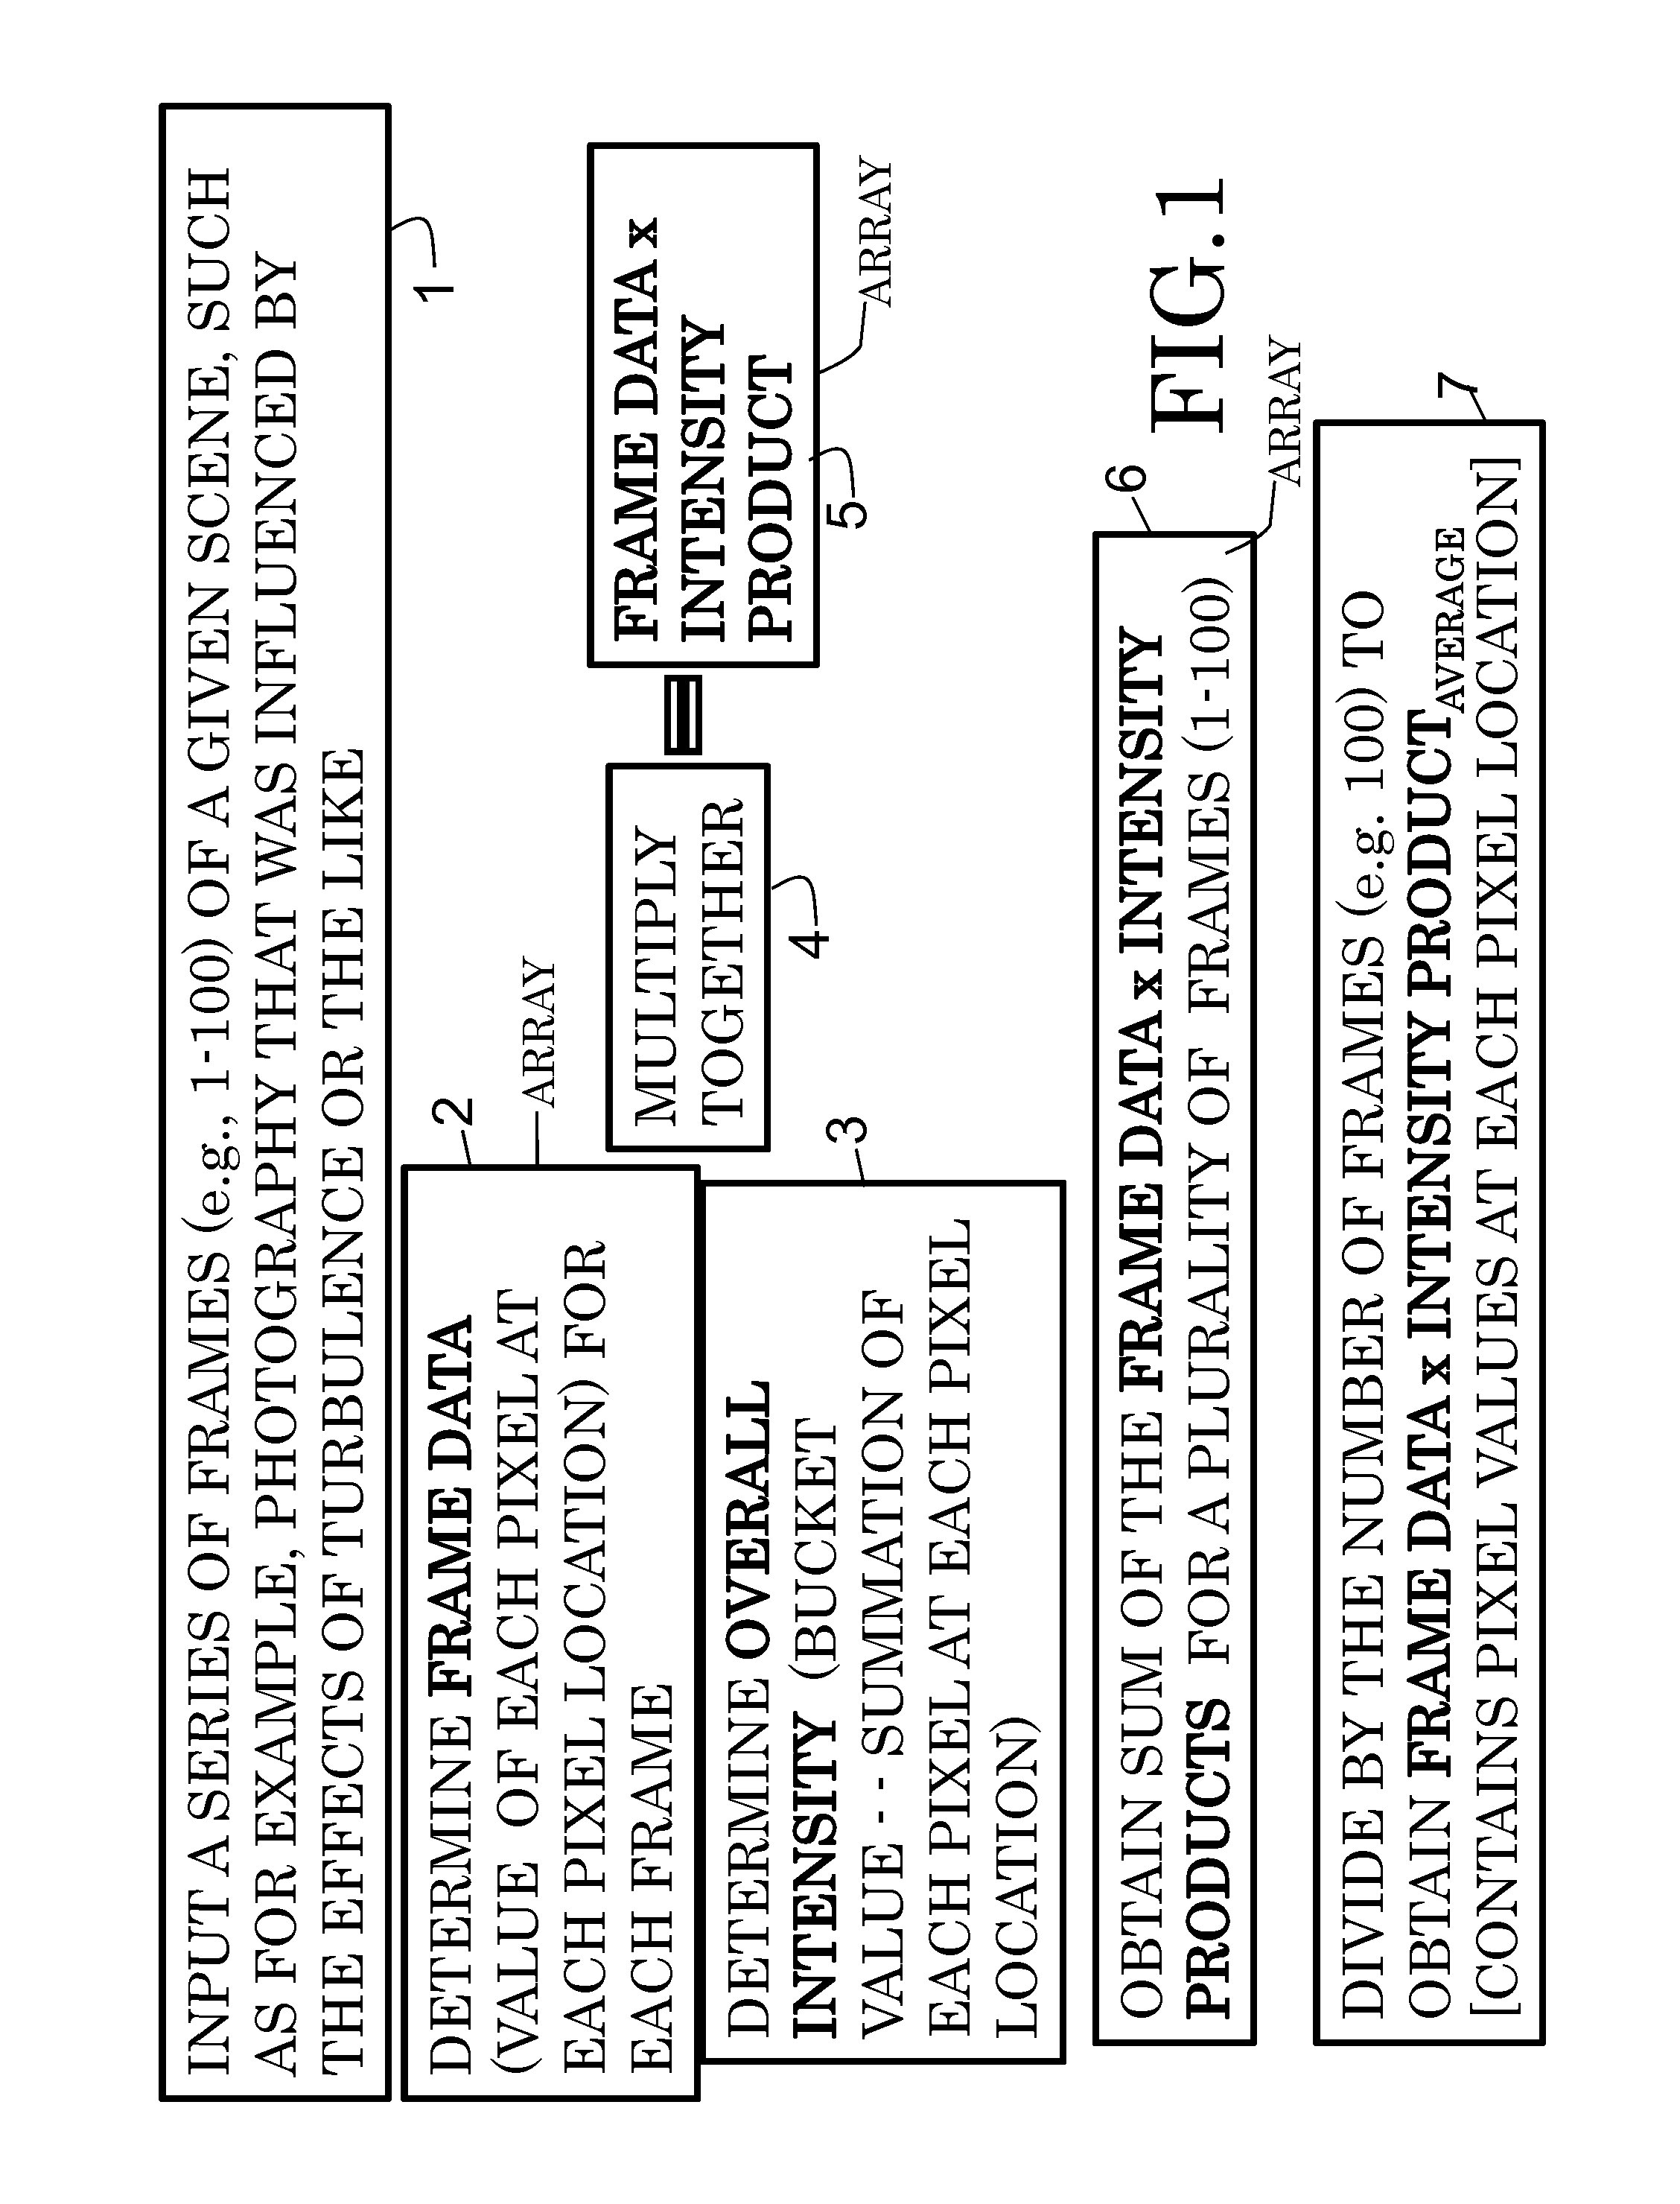 System and processor implemented method for improved image quality and generating an image of a target illuminated by quantum particles